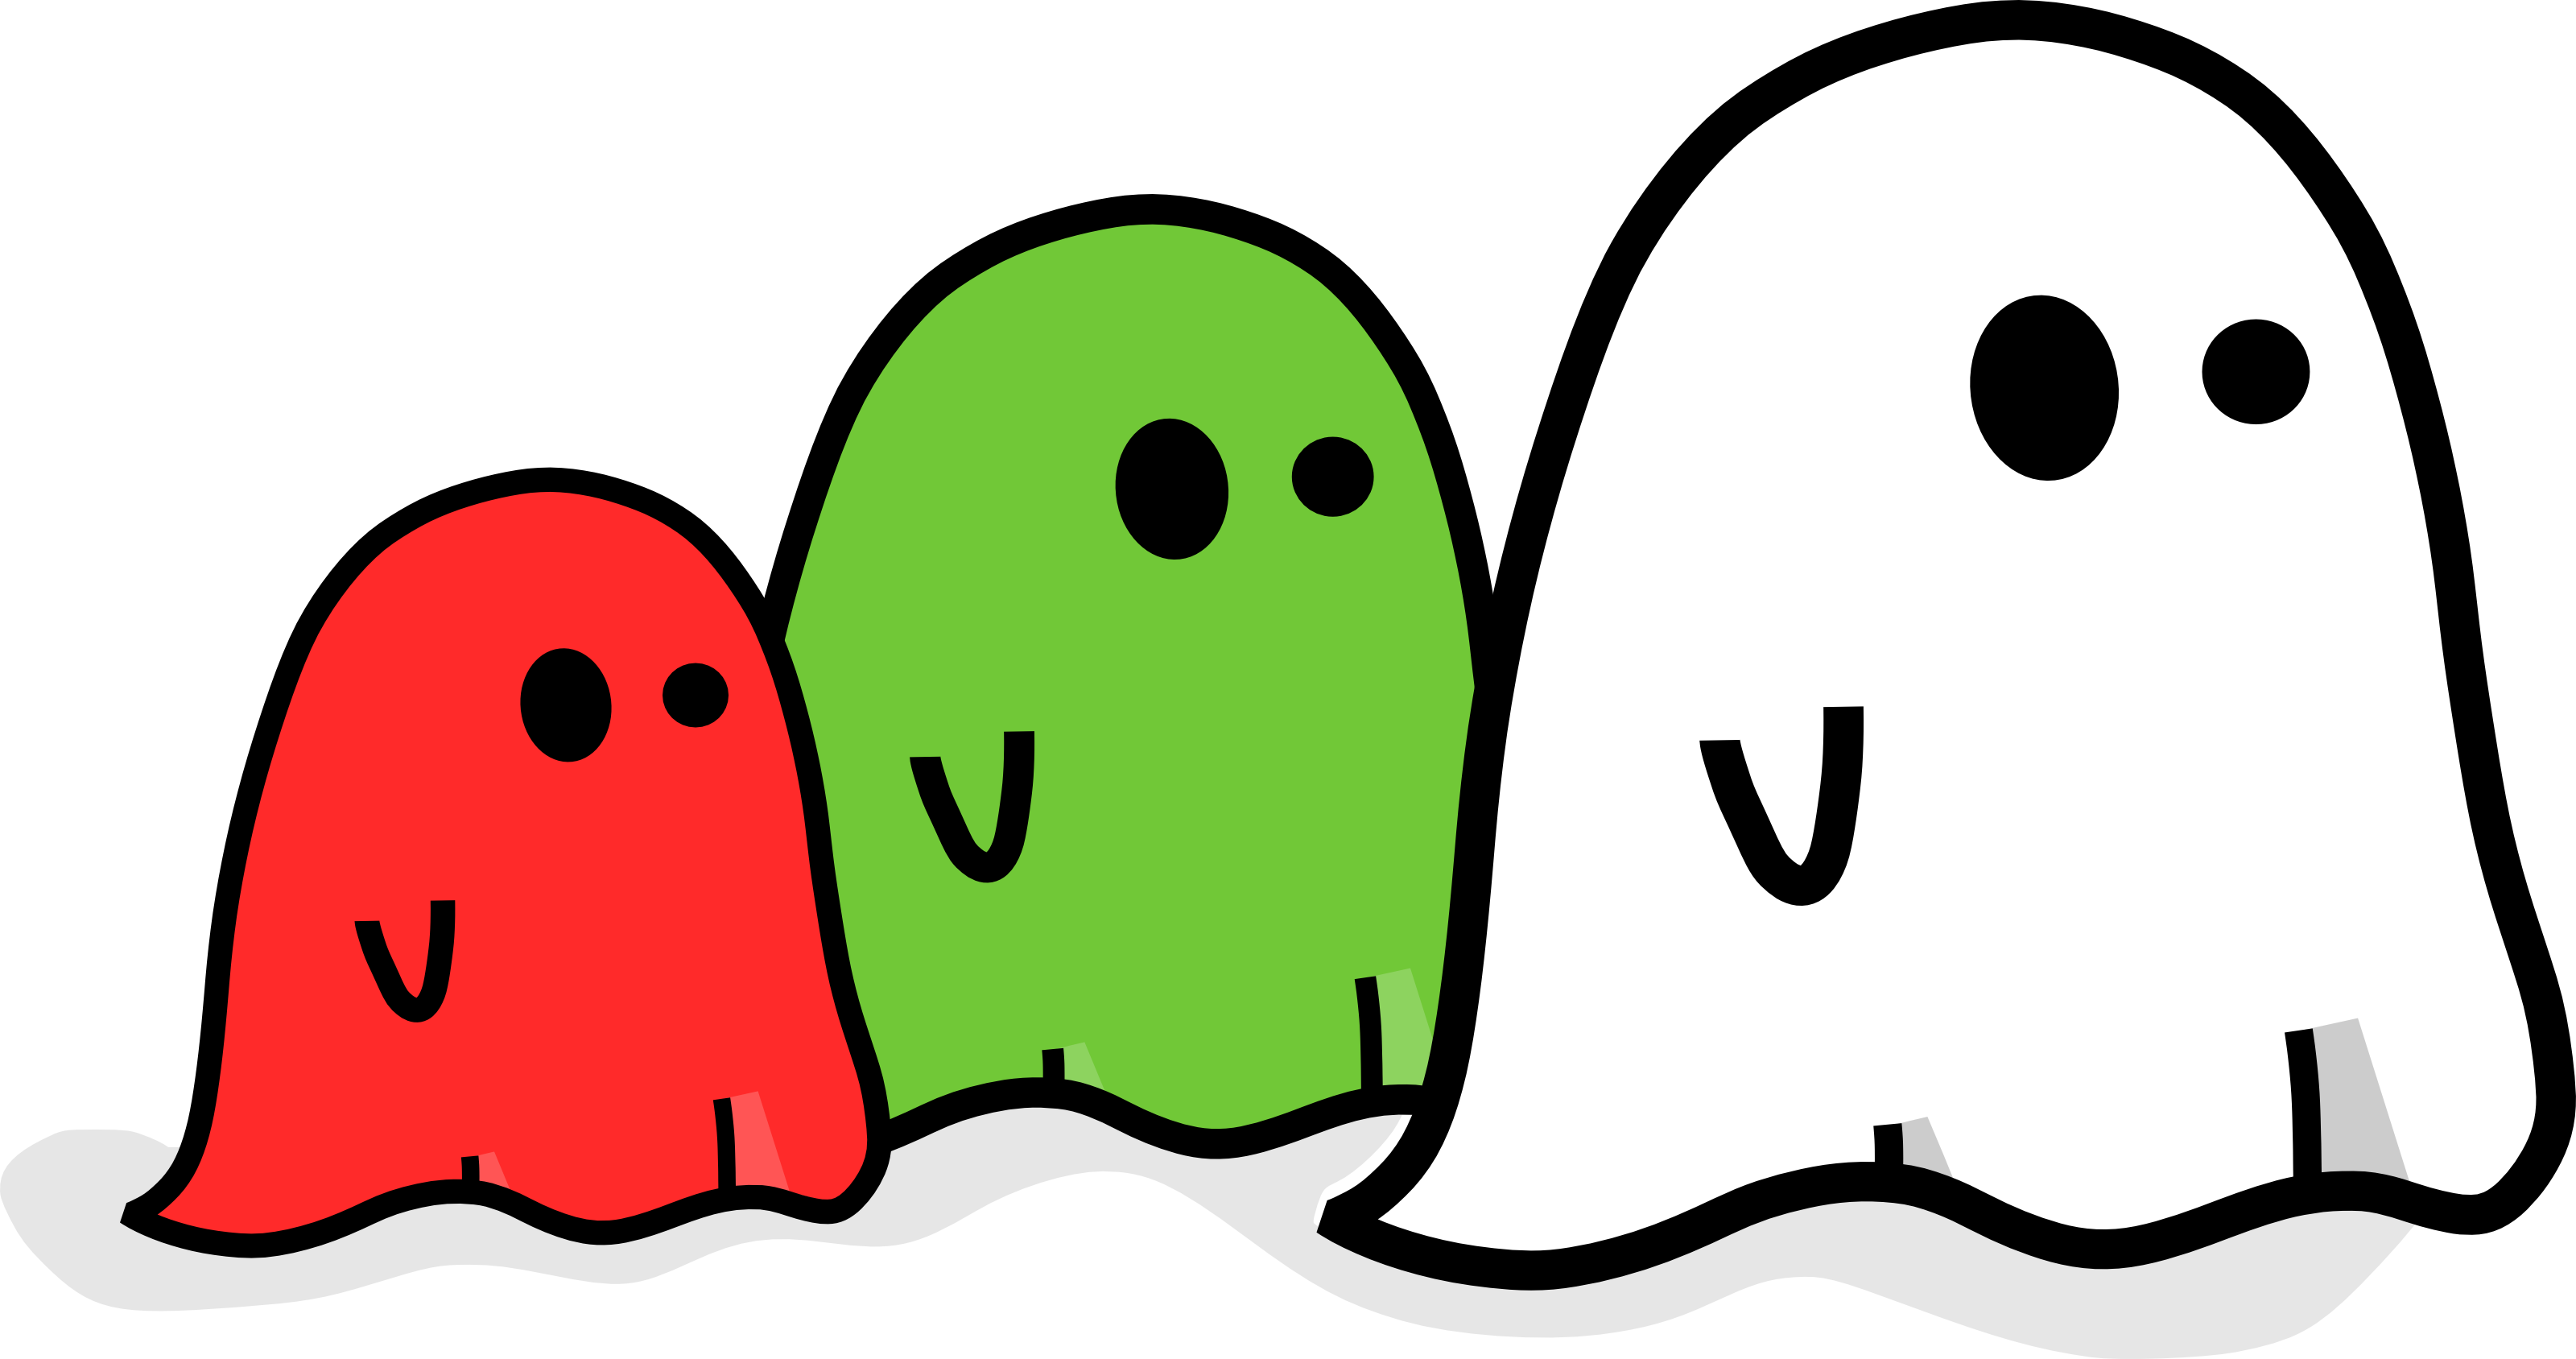 Ghosts   Free Halloween Vector Clipart Illustration By 0001113